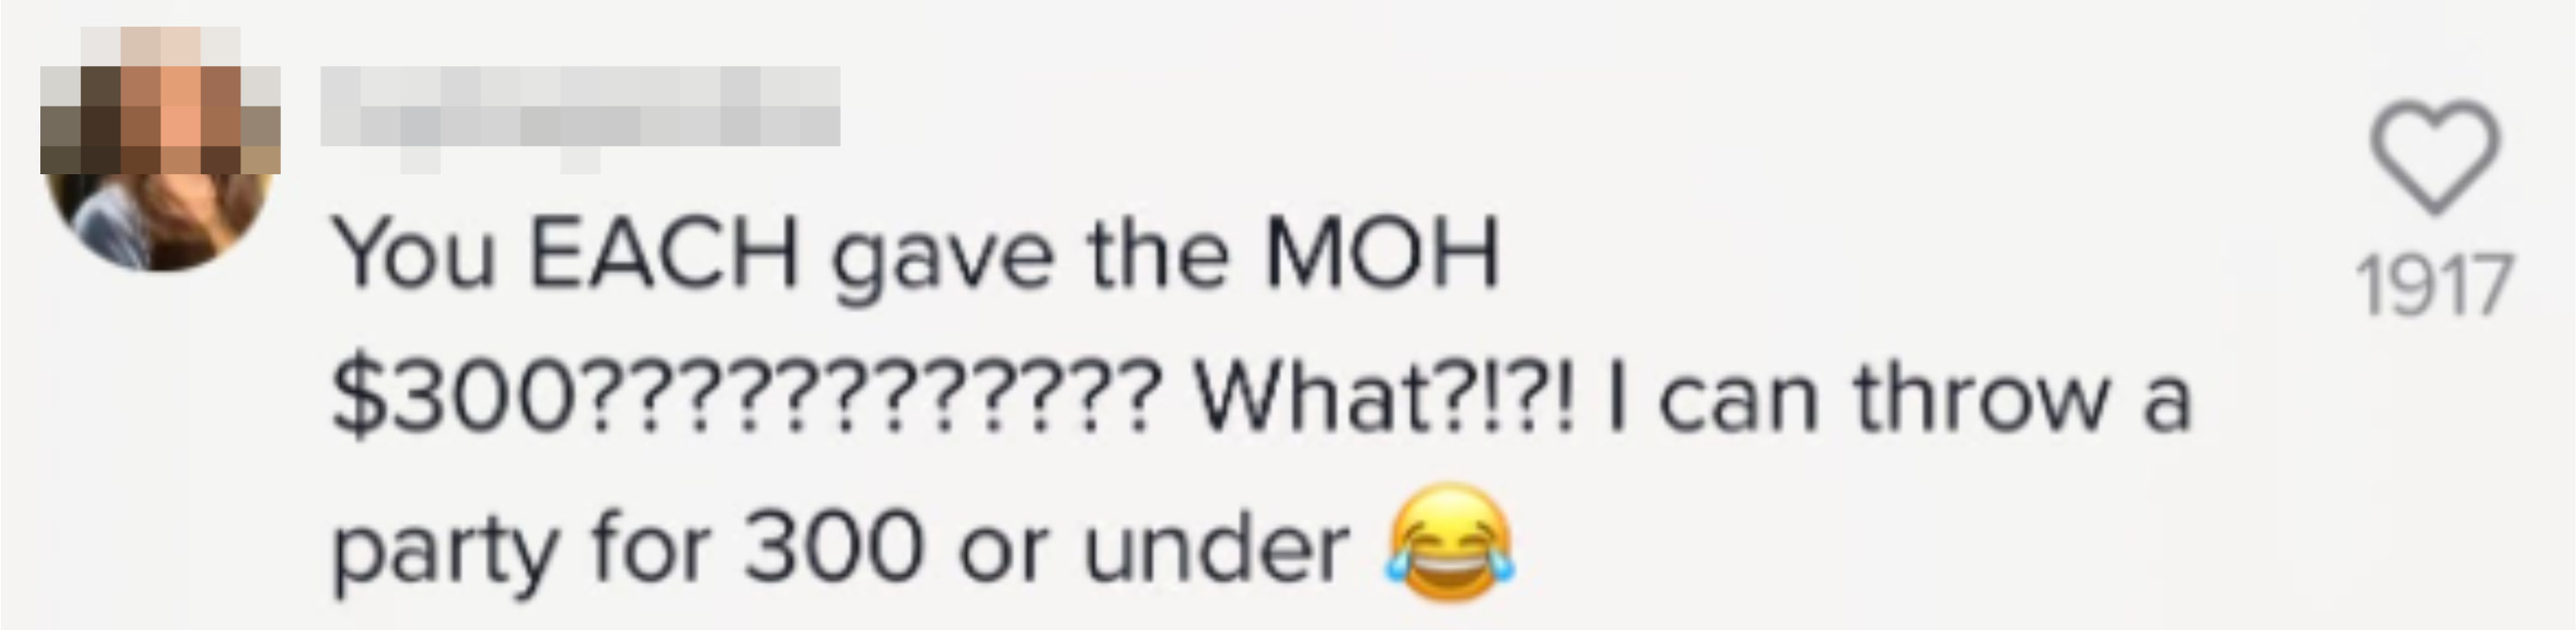 someone shocked that each person gave the MOH $300 each